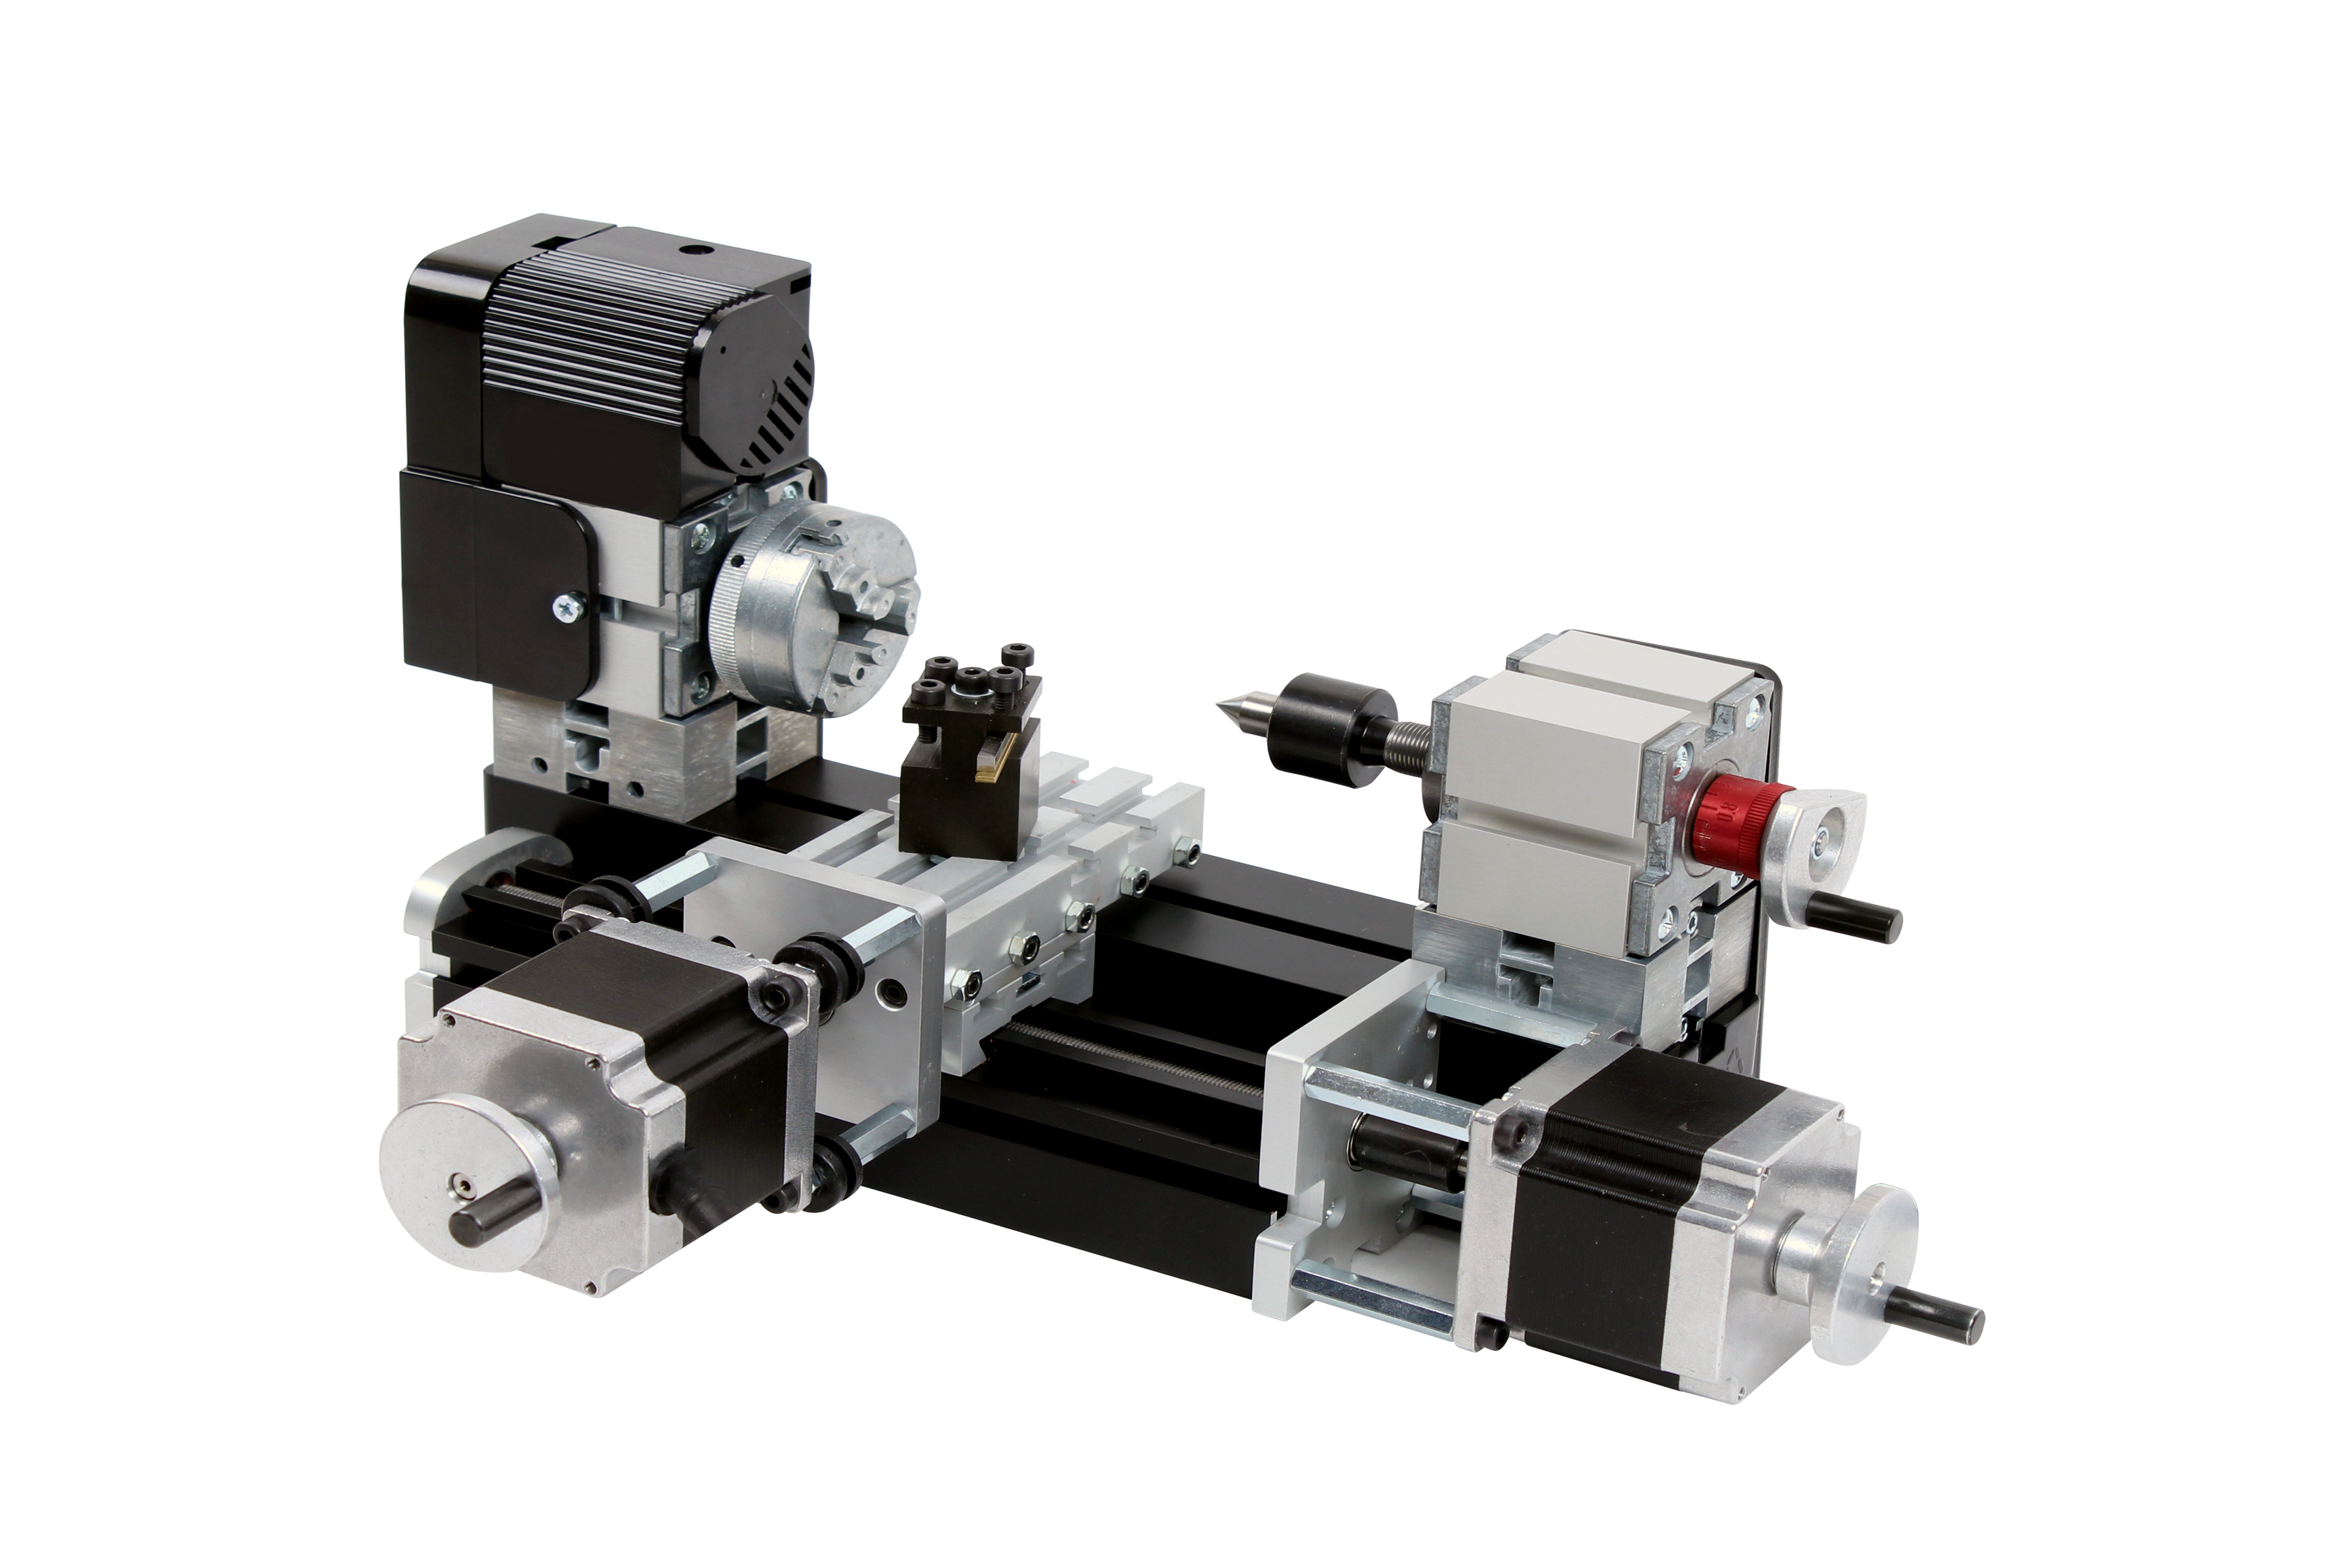 Picture of 2 axis MicroCNC lathe